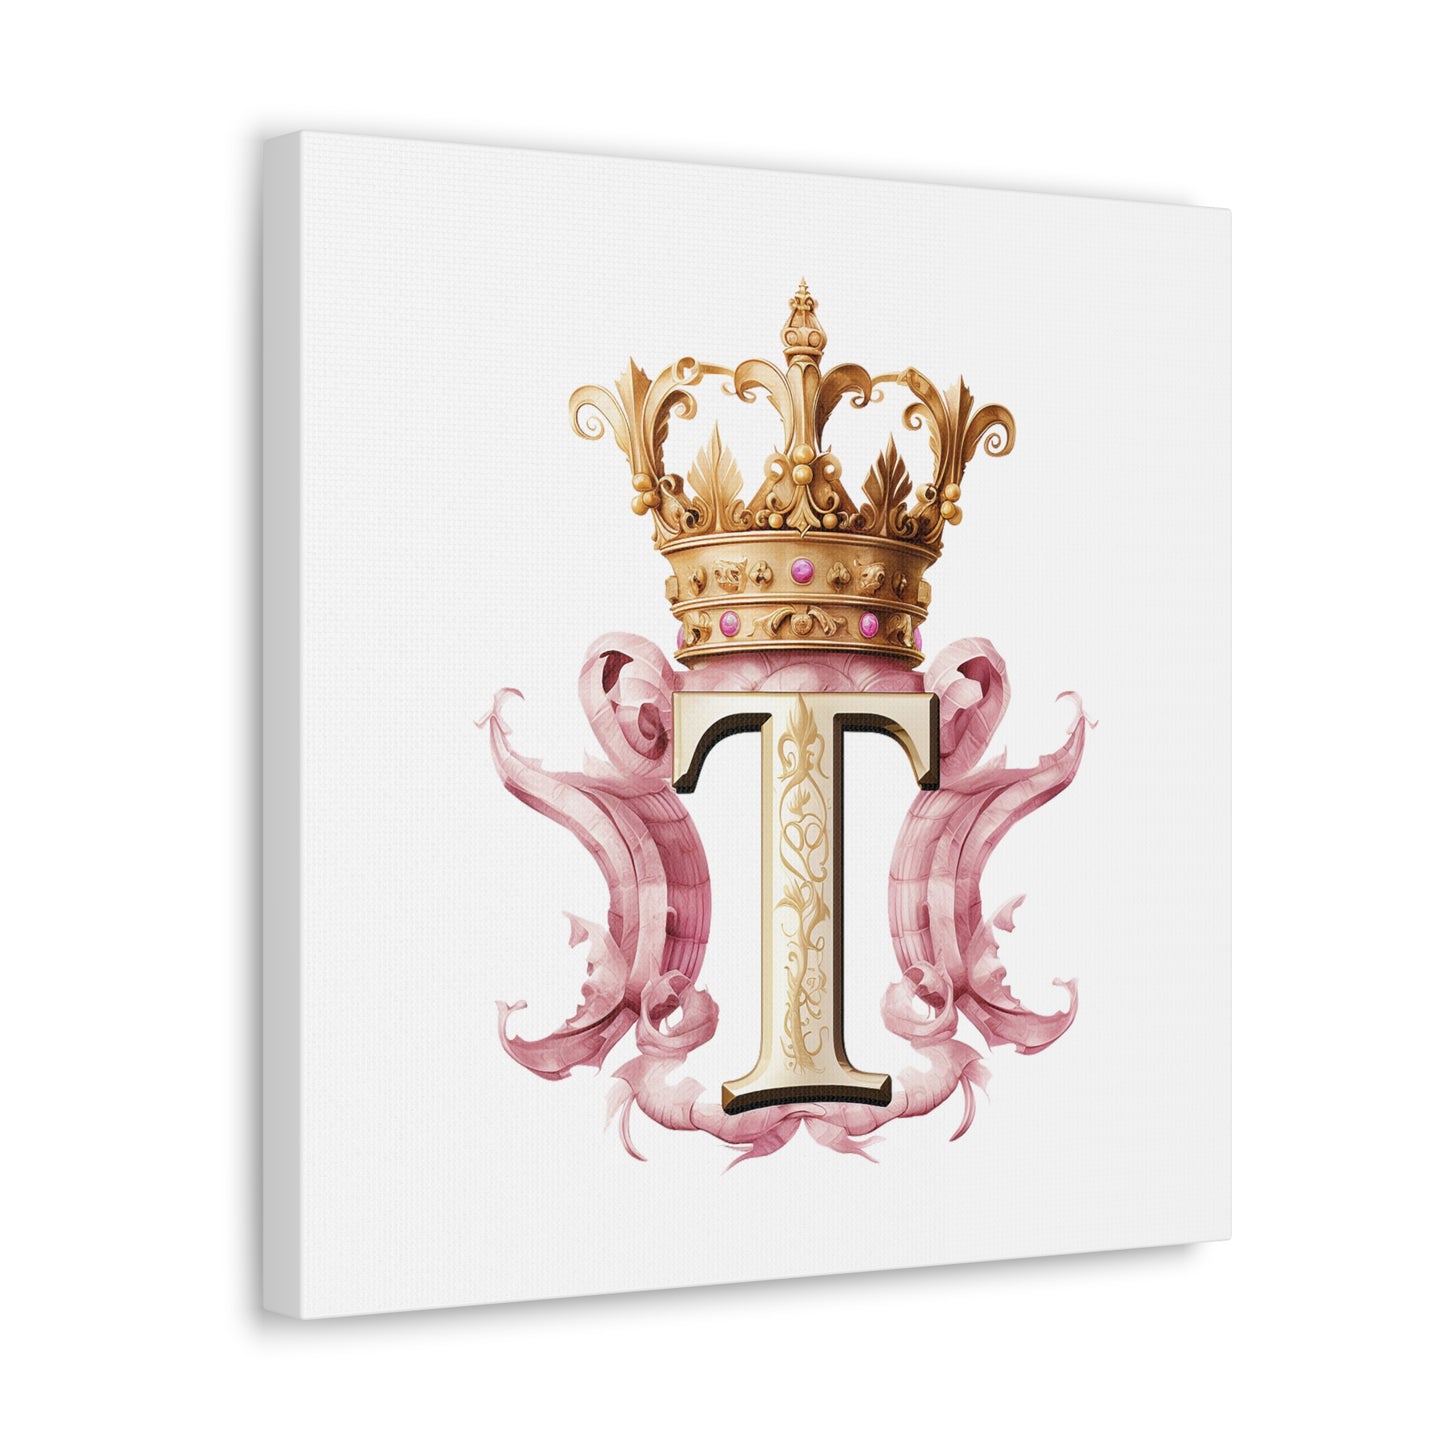 Monogram Style Letter T Canvas Print Gallery Wrap - Personalized Initial with Crown - Pink and Gold